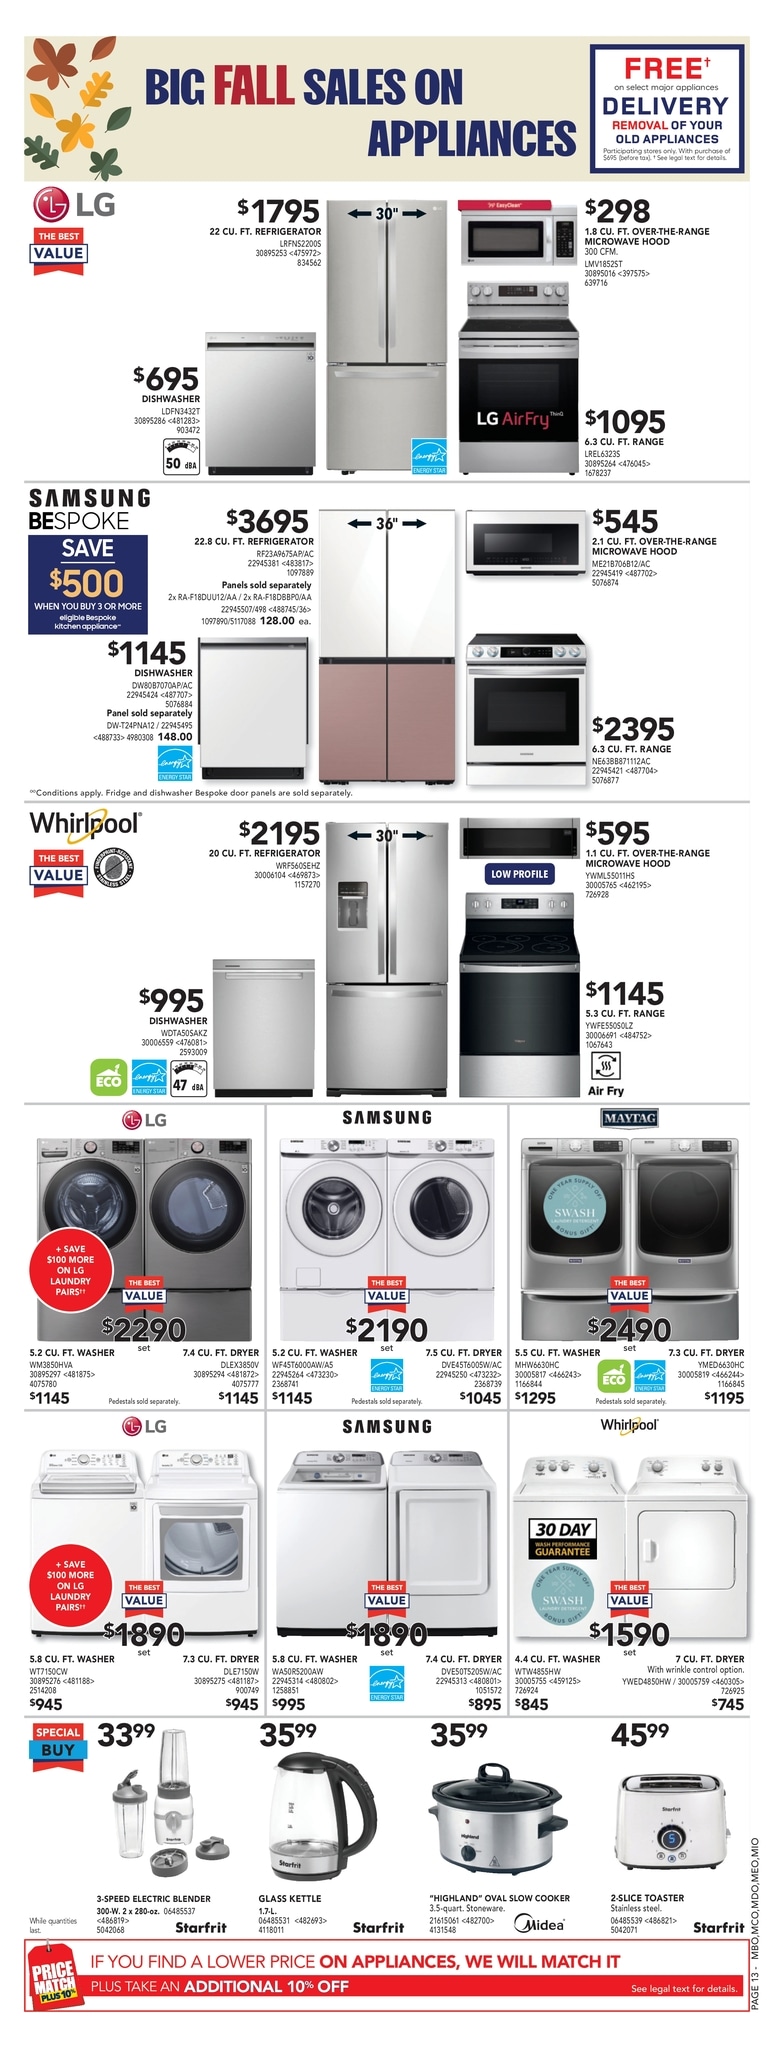 Lowe's - Weekly Flyer Specials - Page 16